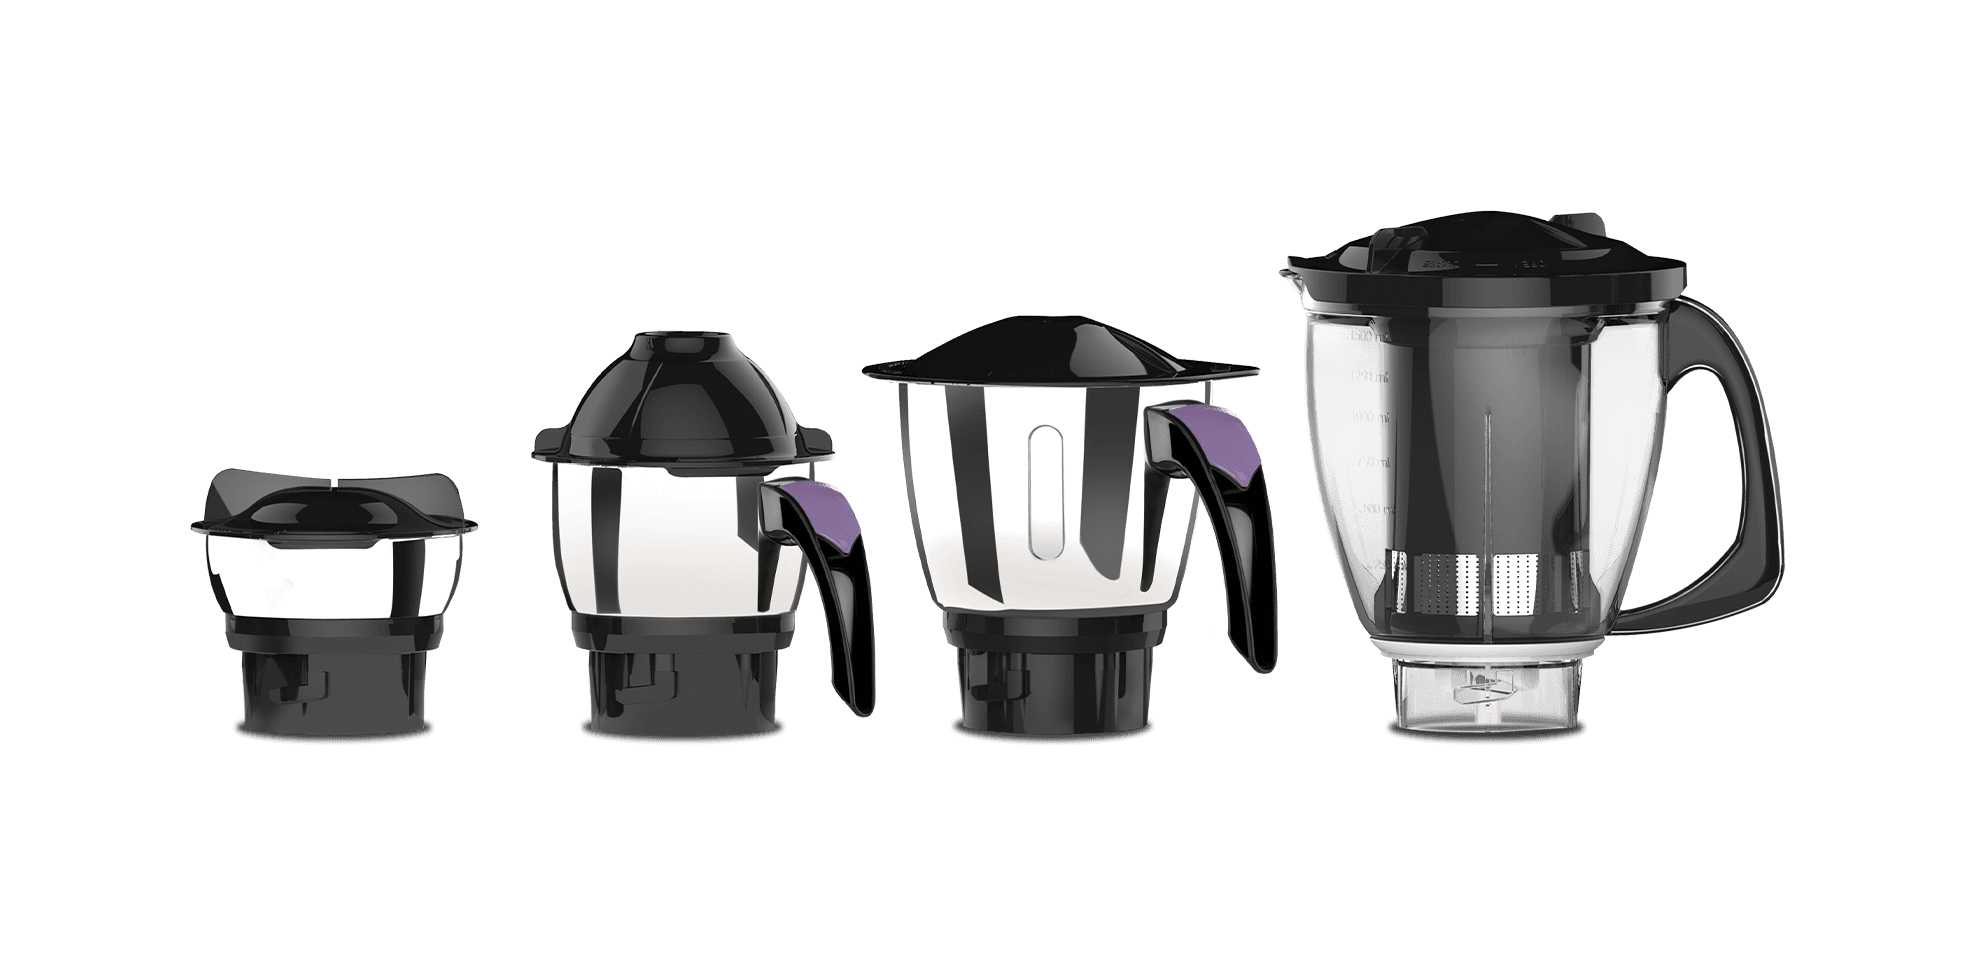 Vidiem Mixer Grinder 556 A (Lavender with Black) | 750 watt Mixer Grinder with 5 Jars in-1 Juicer mixer | Leakproof Jars with self-lock for wet & dry spices, chutneys & Curries | 5 Years Warranty